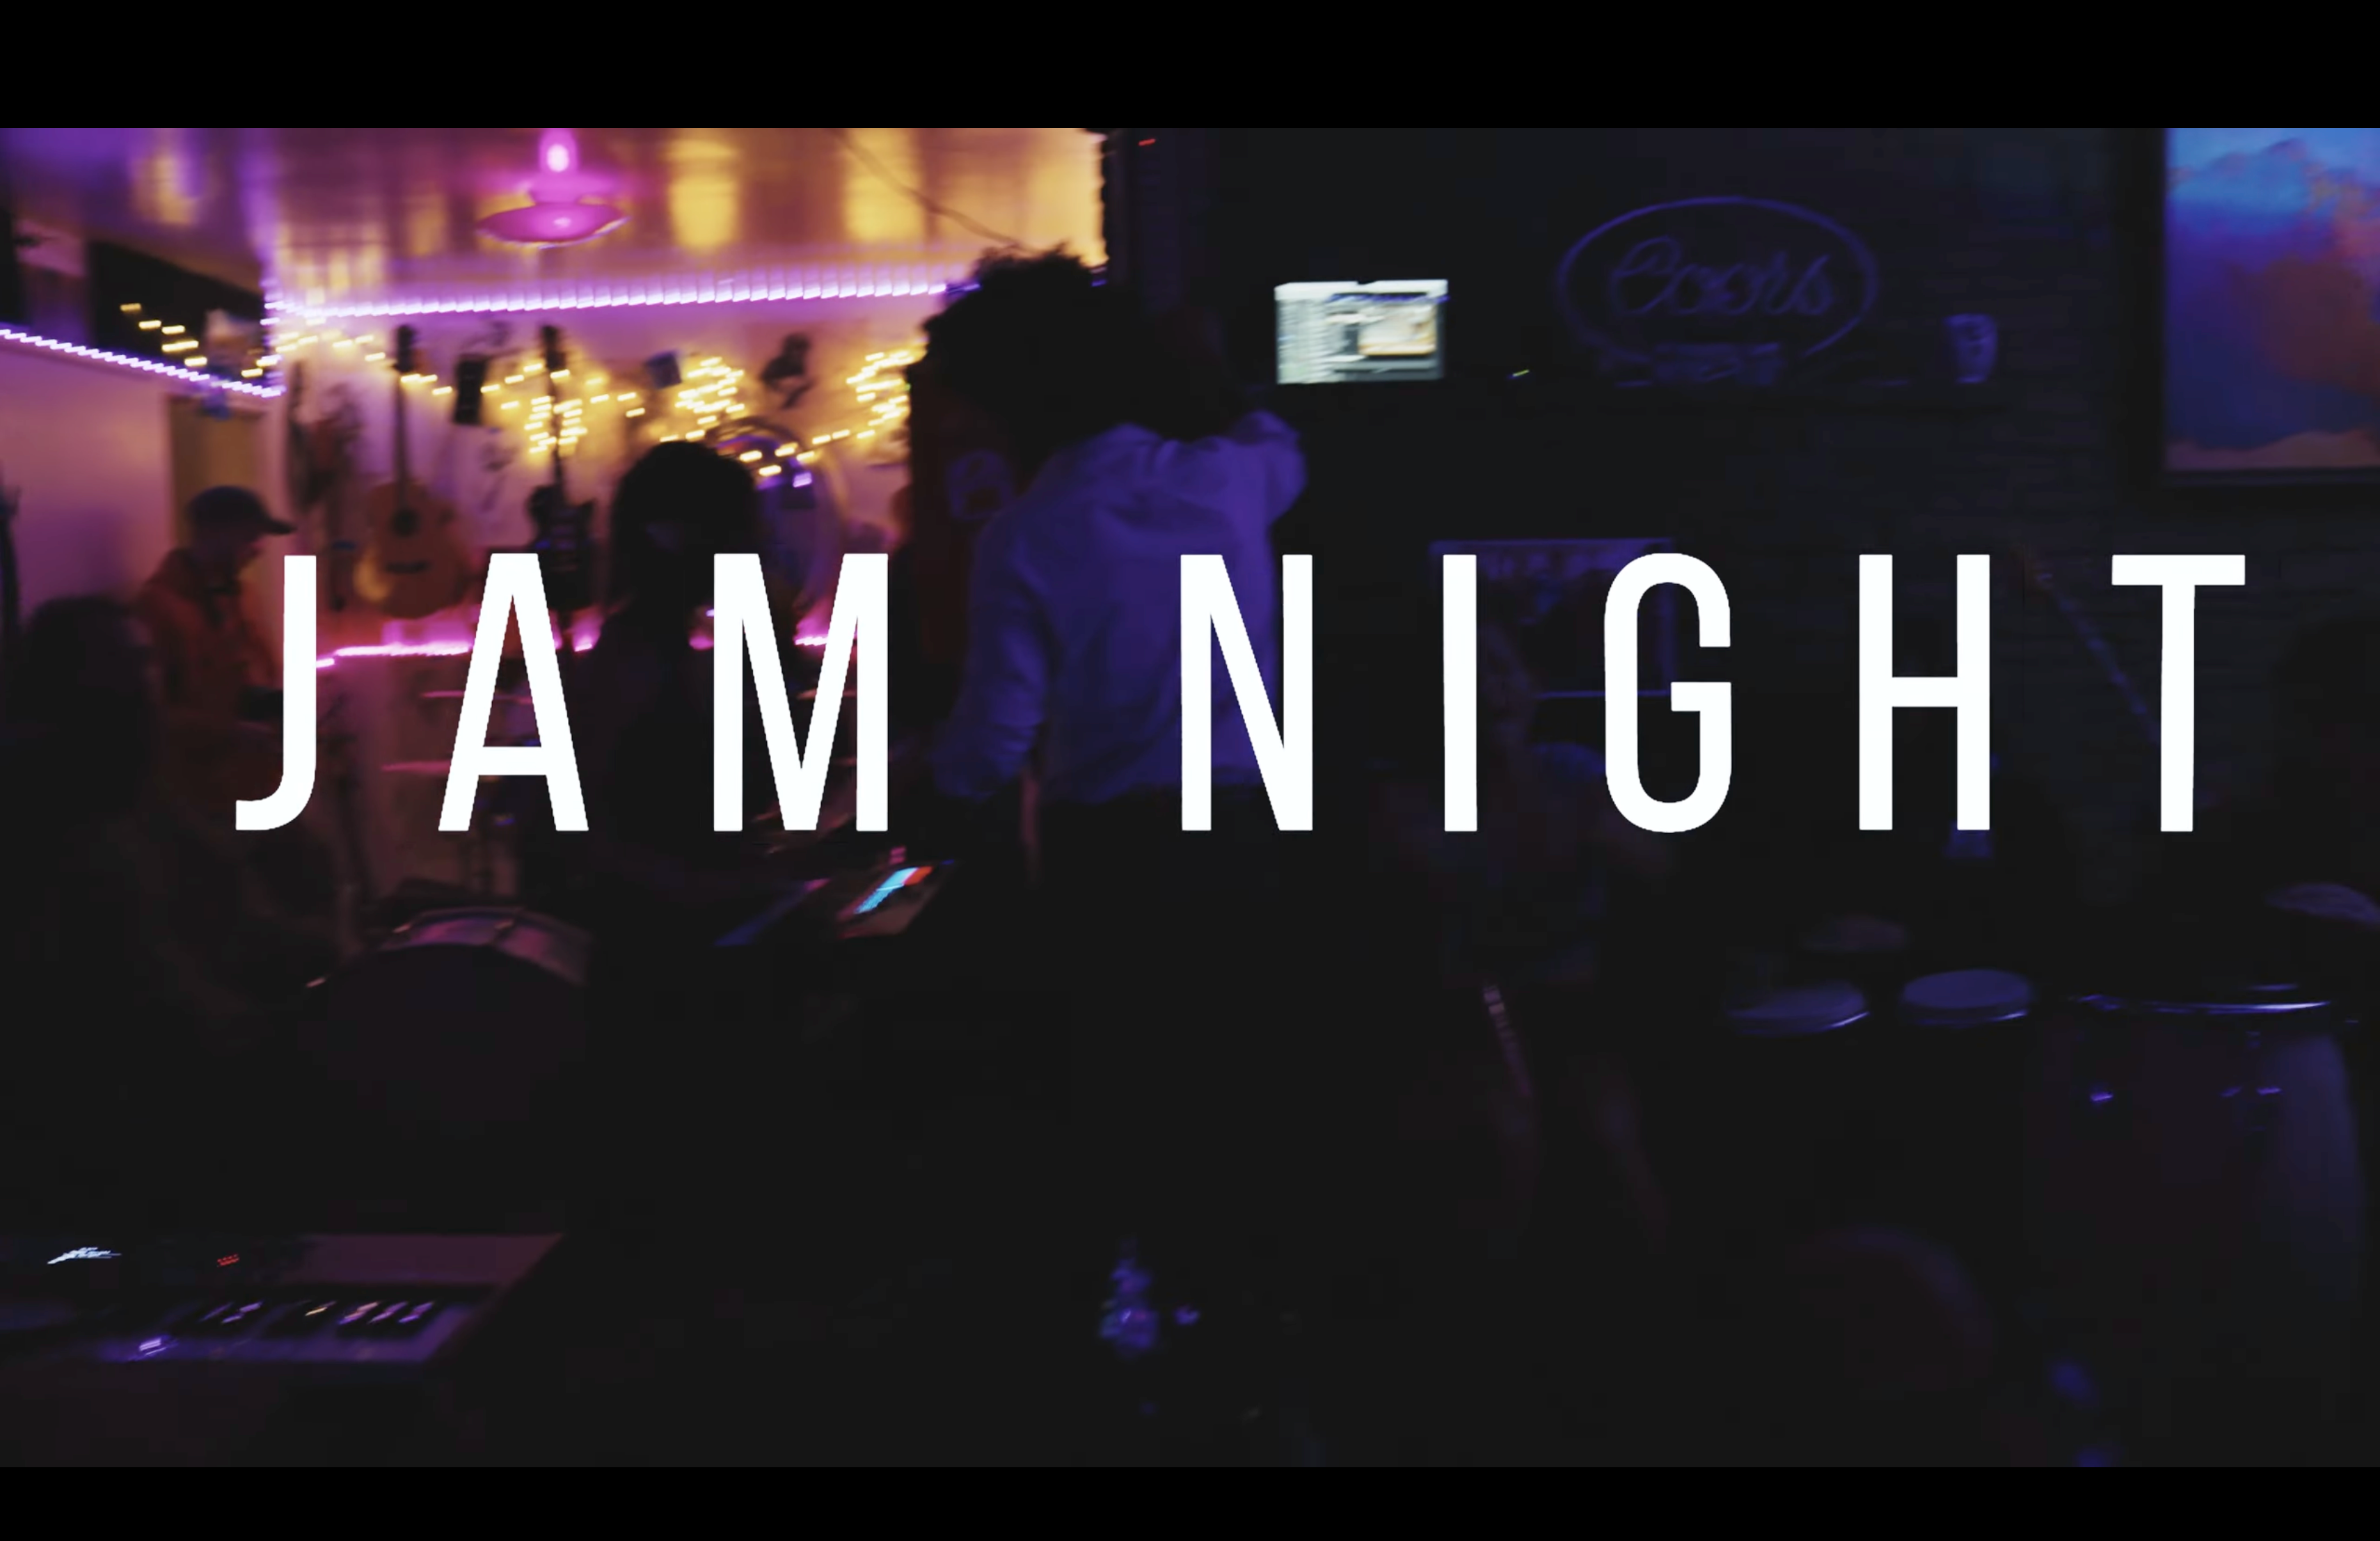 Load video: The Wednesday night jam night documentary. featuring interviews with jammers and footage of jam!